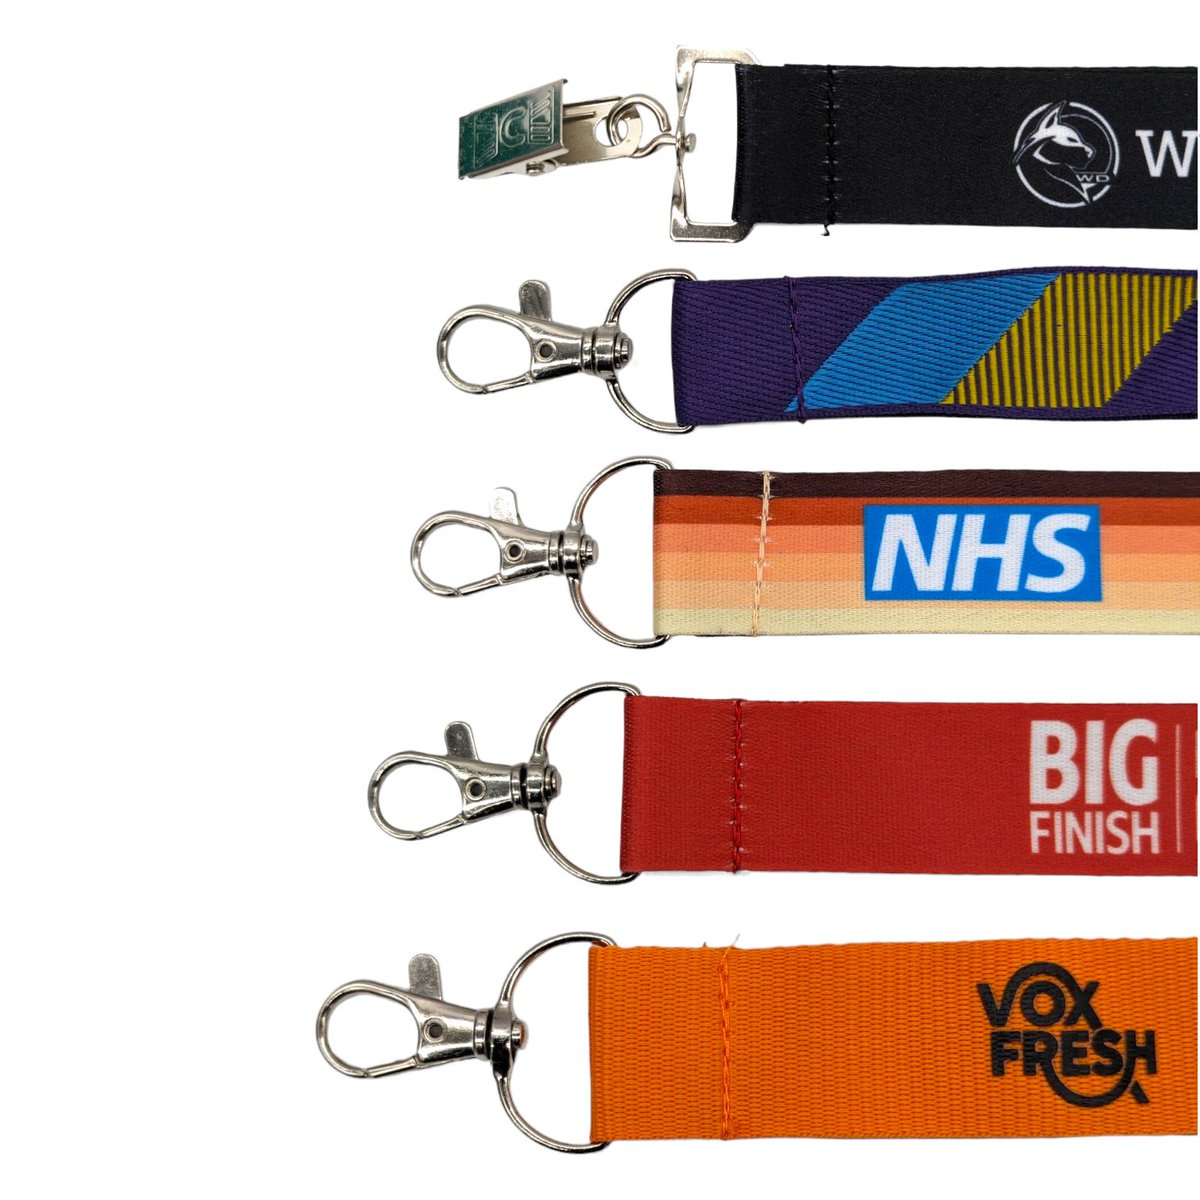 Branded lanyards for festivals, educational facilities, conventions, businesses. Pretty much anywhere you find people and security badges, you'll find Made by Cooper lanyards. madebycooper.co.uk/products/lanya…